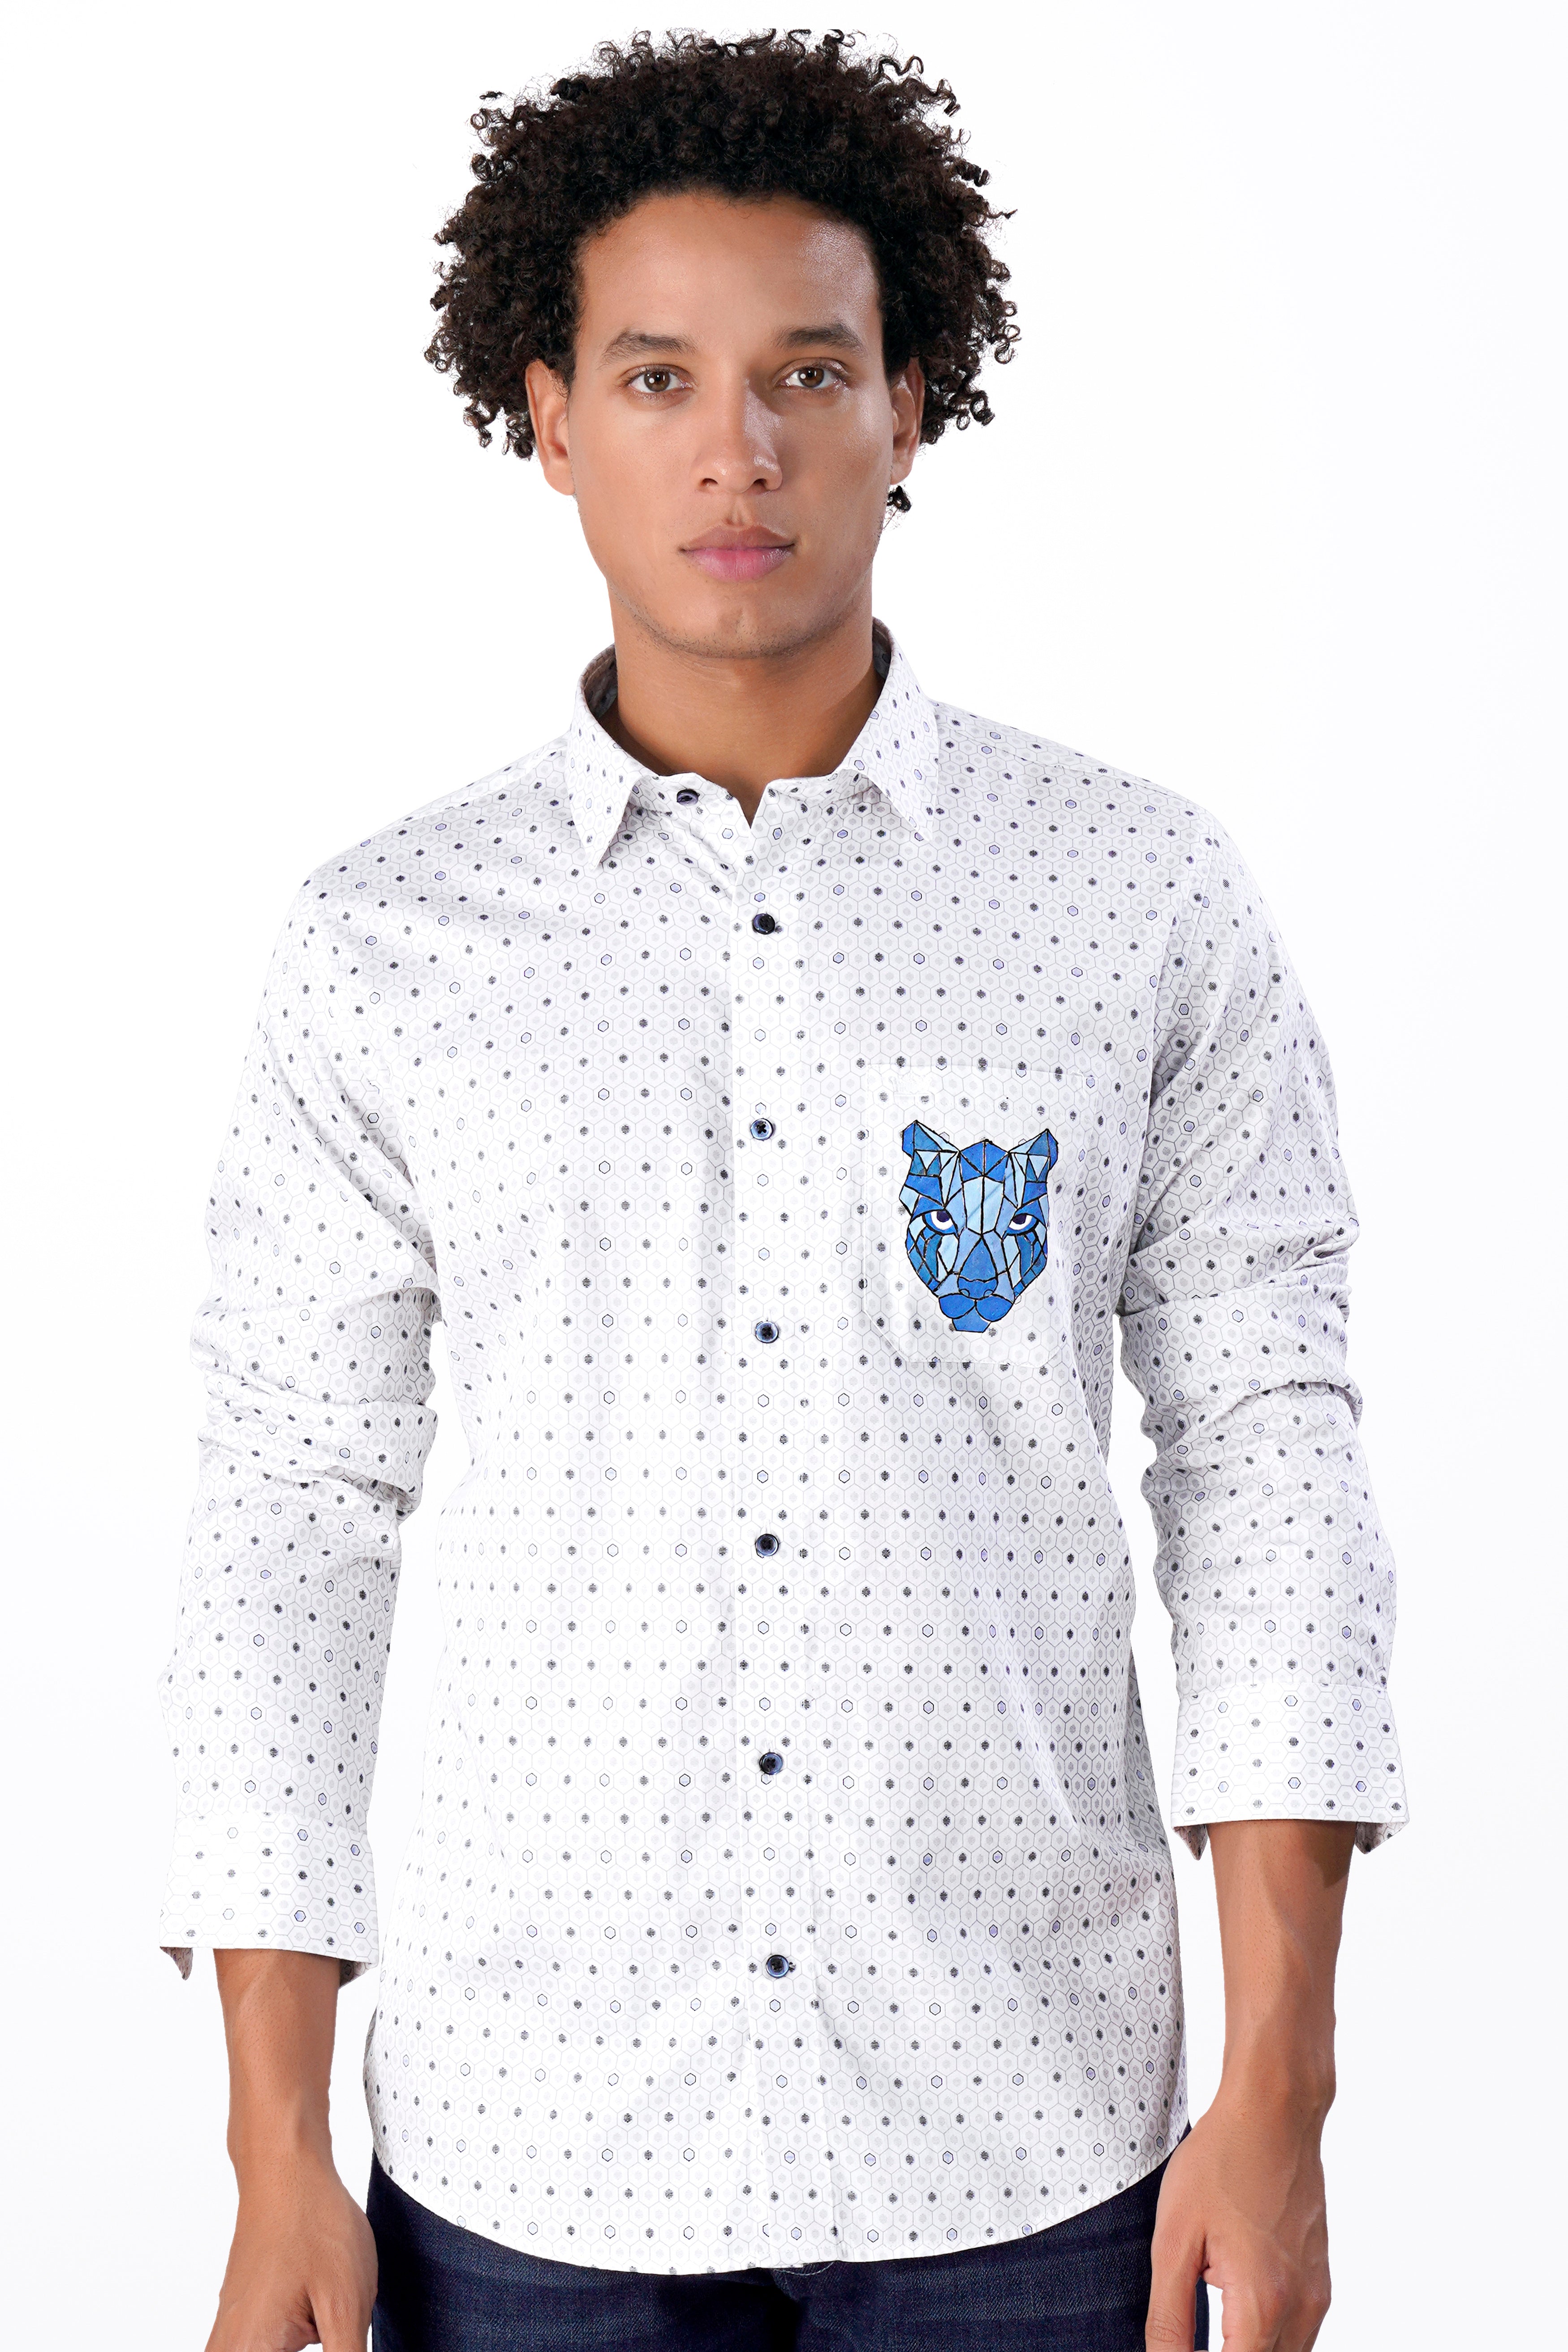 Bright White with Gull Blue Printed and Hand Painted Super Soft Premium Cotton Designer Shirt 6291-BLE-ART-38, 6291-BLE-ART-H-38, 6291-BLE-ART-39, 6291-BLE-ART-H-39, 6291-BLE-ART-40, 6291-BLE-ART-H-40, 6291-BLE-ART-42, 6291-BLE-ART-H-42, 6291-BLE-ART-44, 6291-BLE-ART-H-44, 6291-BLE-ART-46, 6291-BLE-ART-H-46, 6291-BLE-ART-48, 6291-BLE-ART-H-48, 6291-BLE-ART-50, 6291-BLE-ART-H-50, 6291-BLE-ART-52, 6291-BLE-ART-H-52